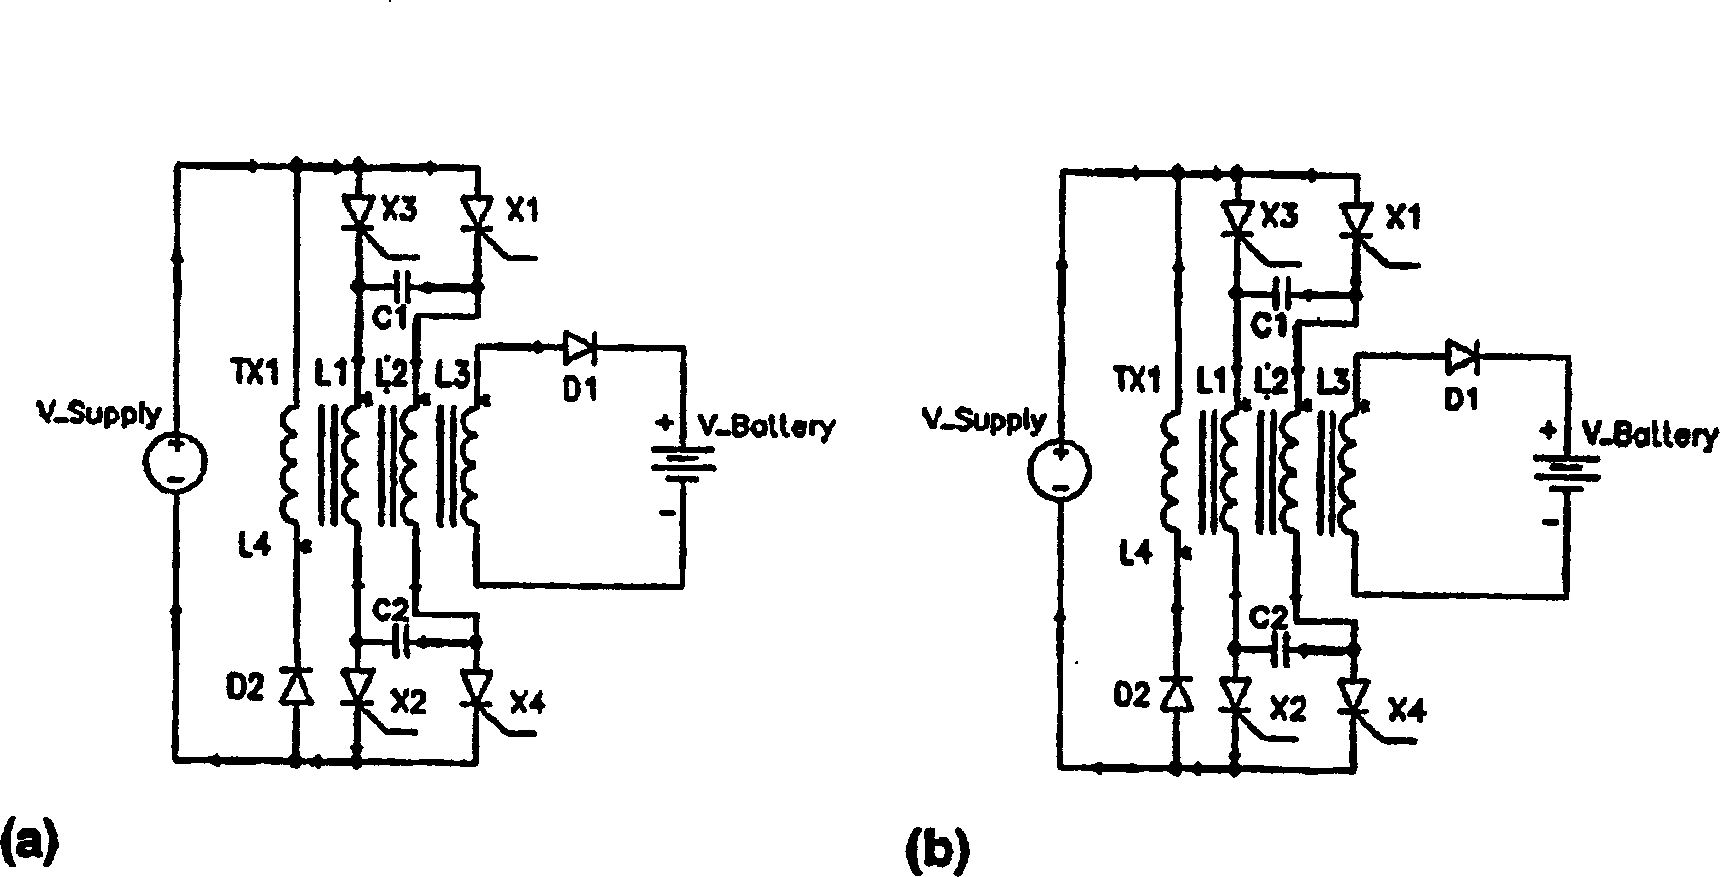 Pulse charging an electrochemical device